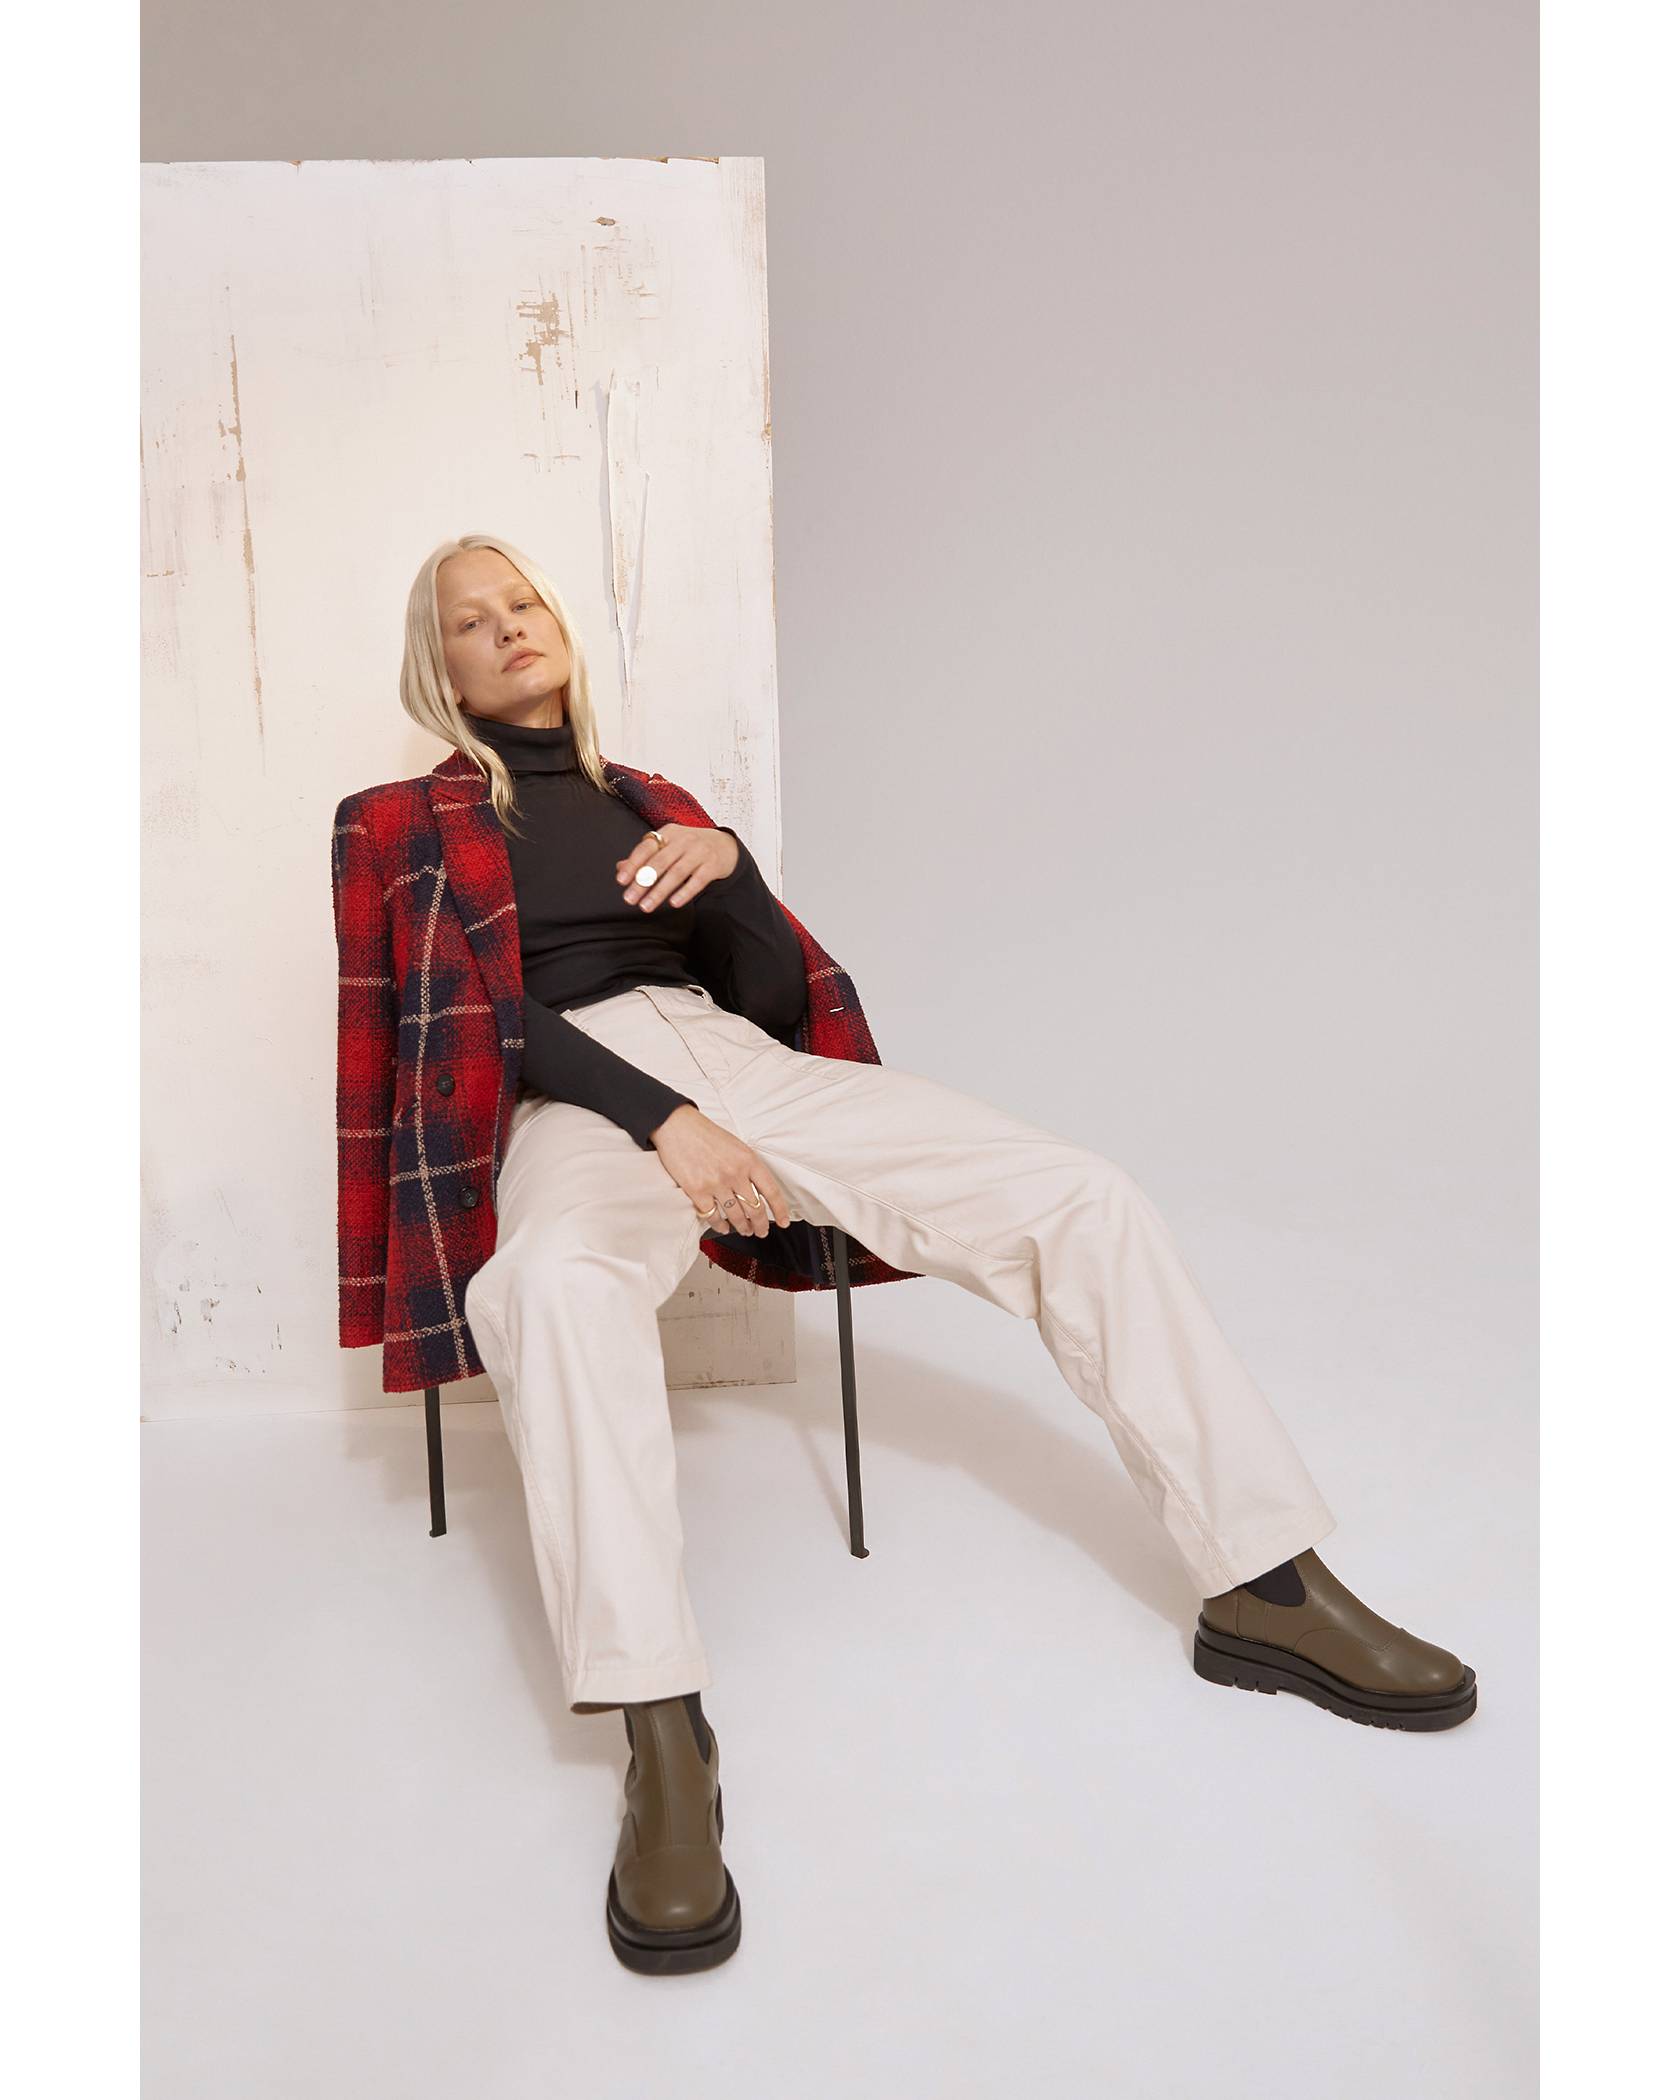 Model wearing red plaid jacket, black turtleneck, cream pants, and green boots